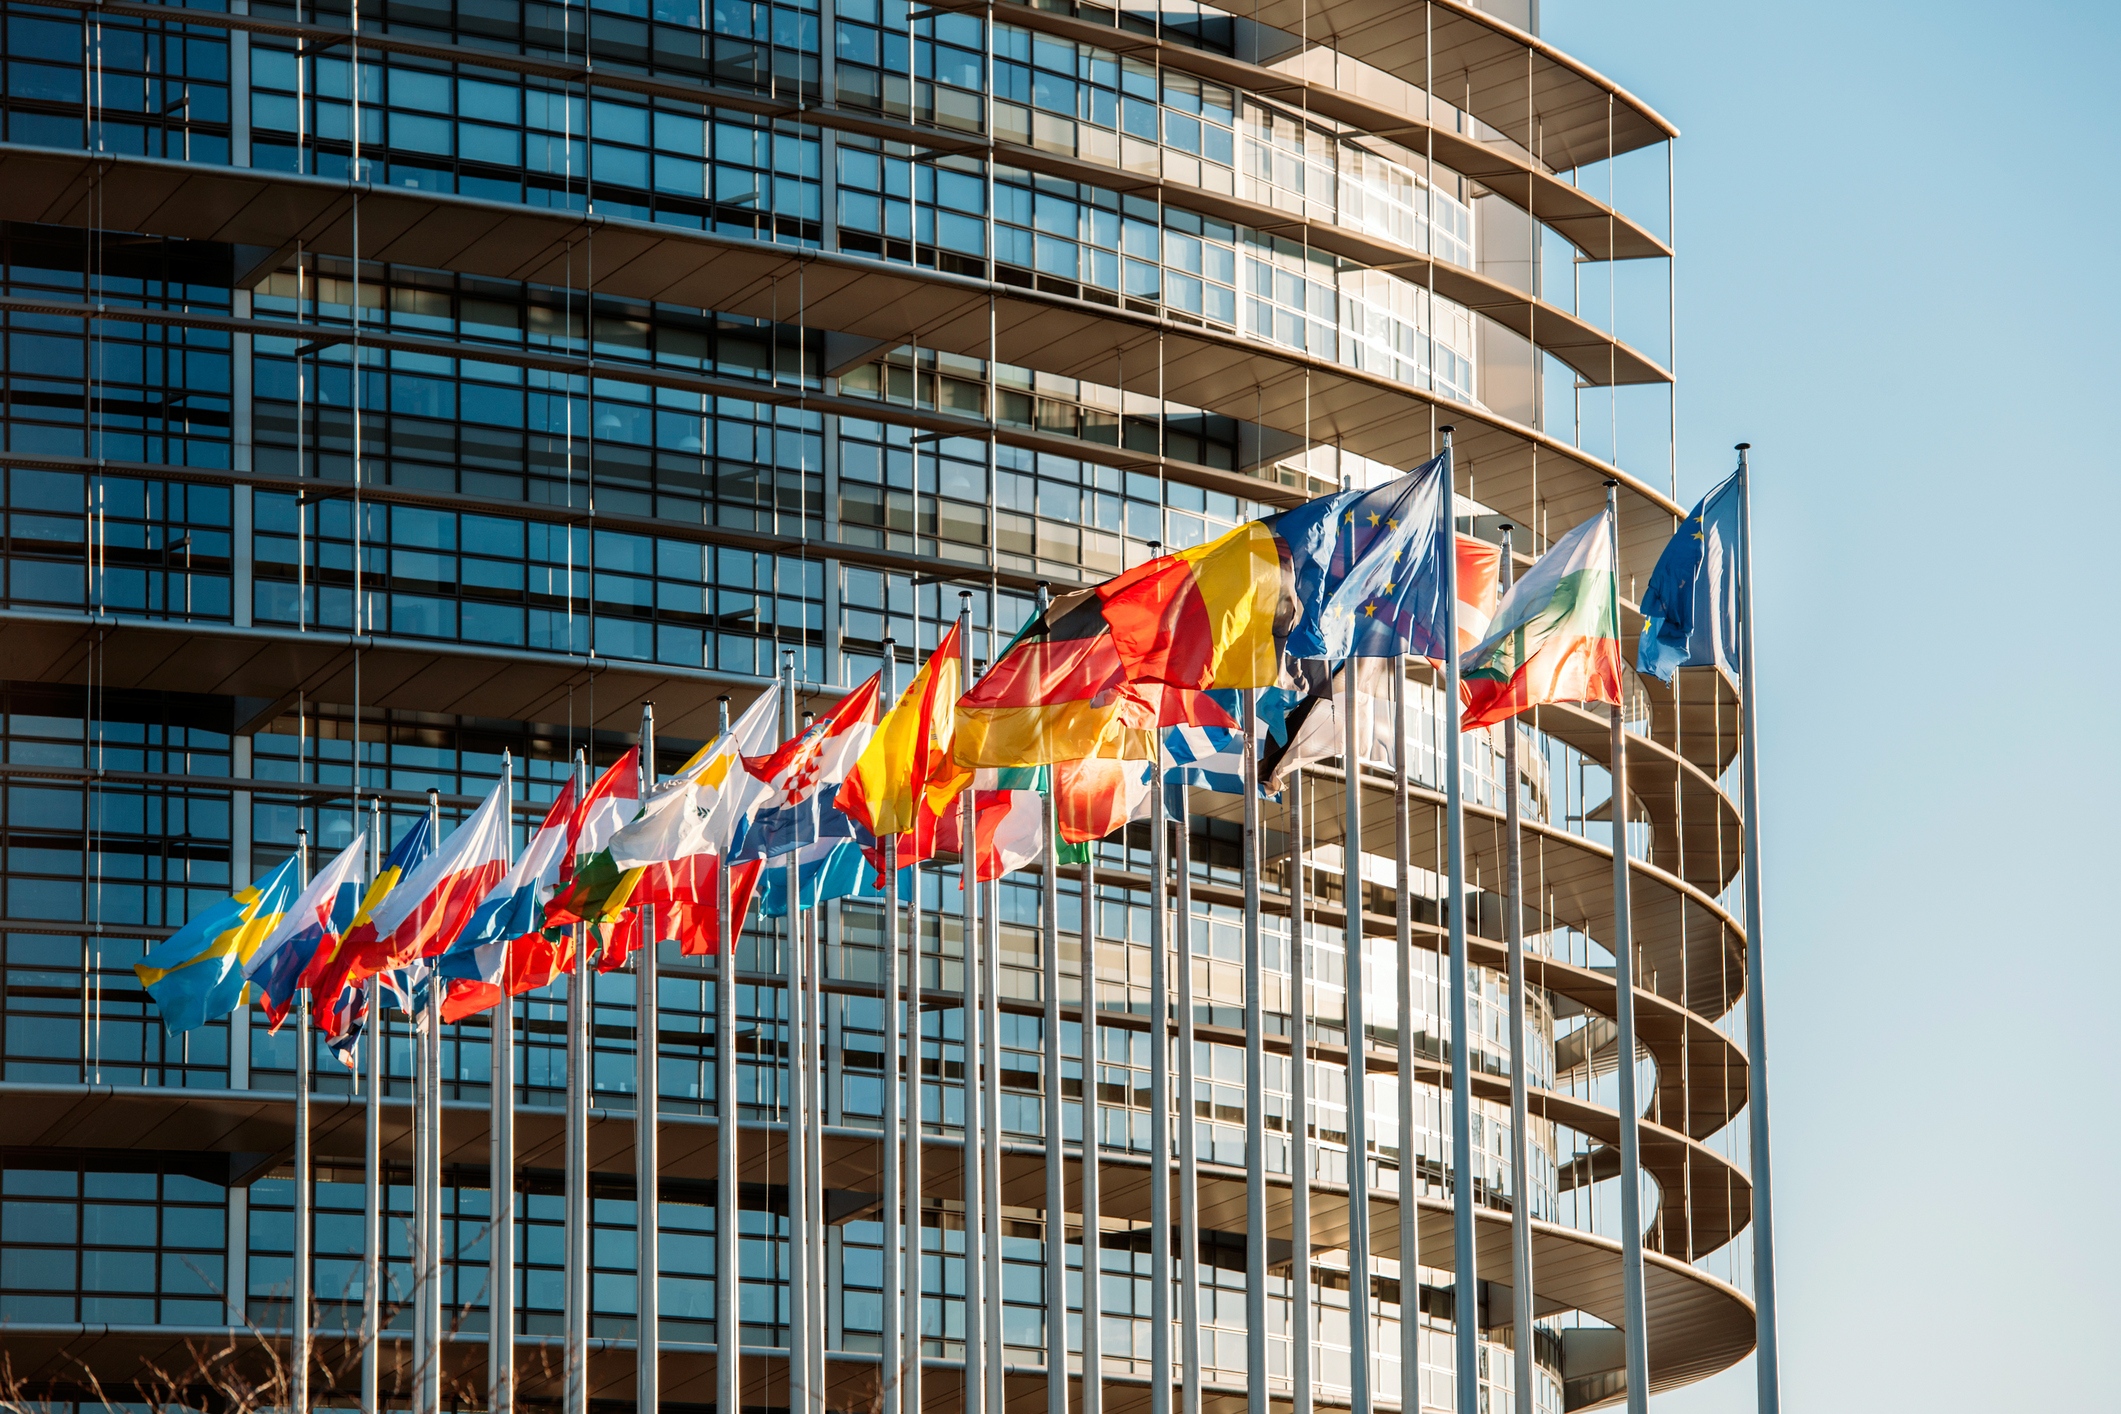 EU Building with flags letting agency